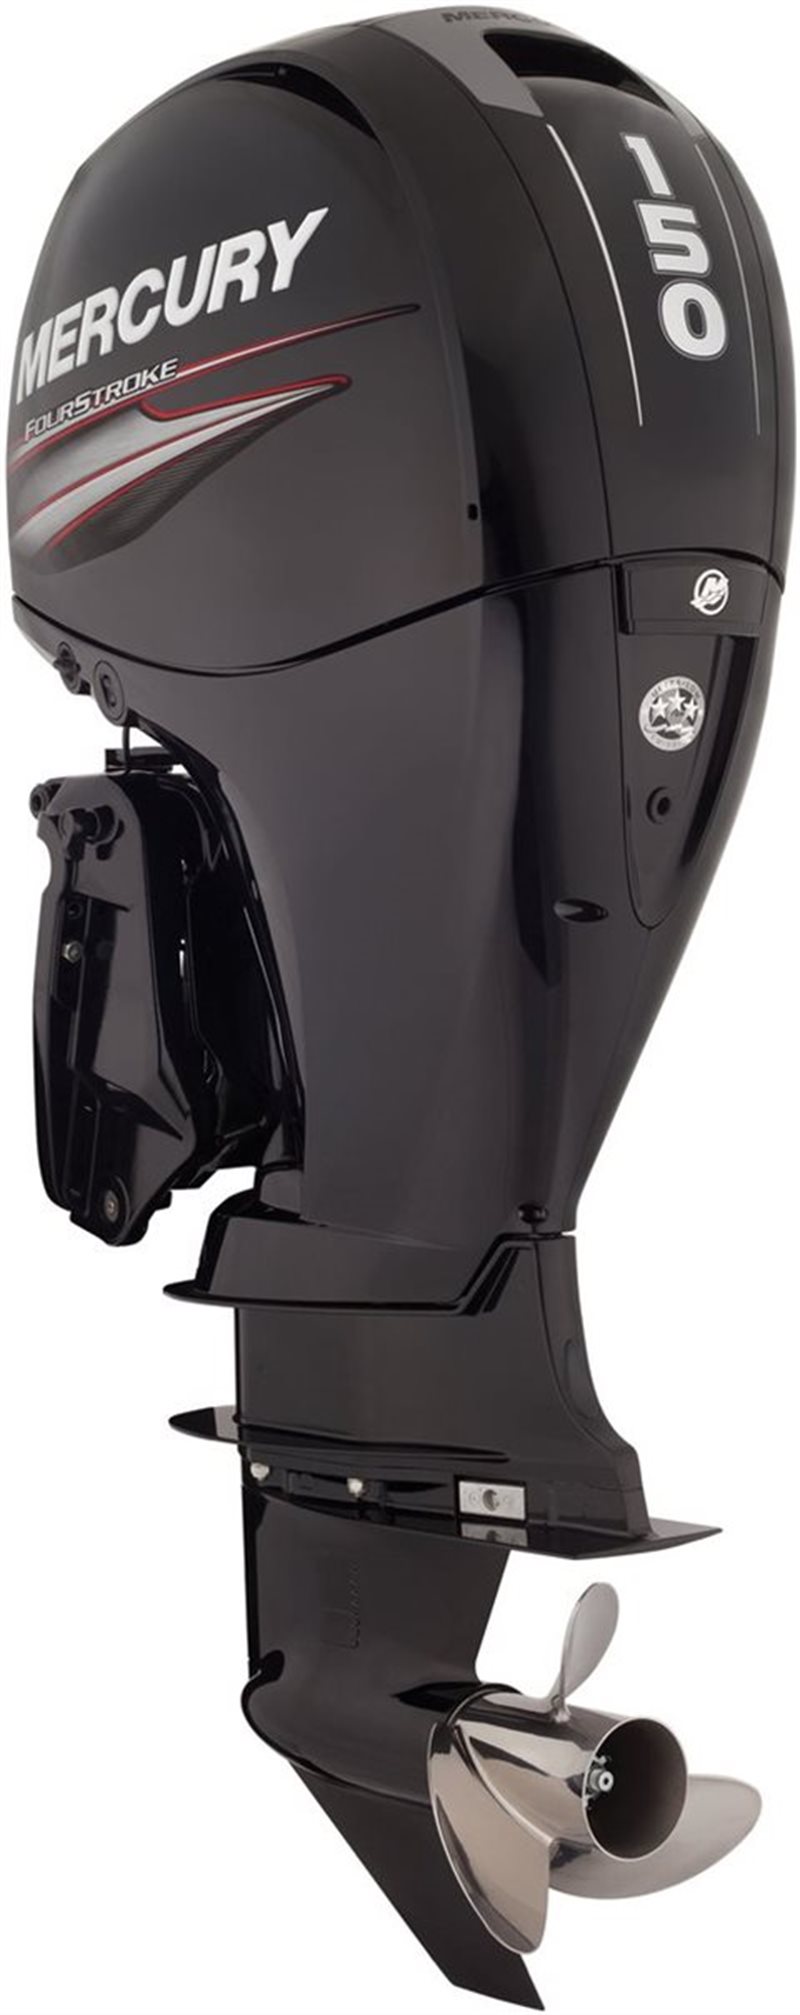 2020 Mercury Outboard FourStroke 150 hp 150 hp at Fort Fremont Marine